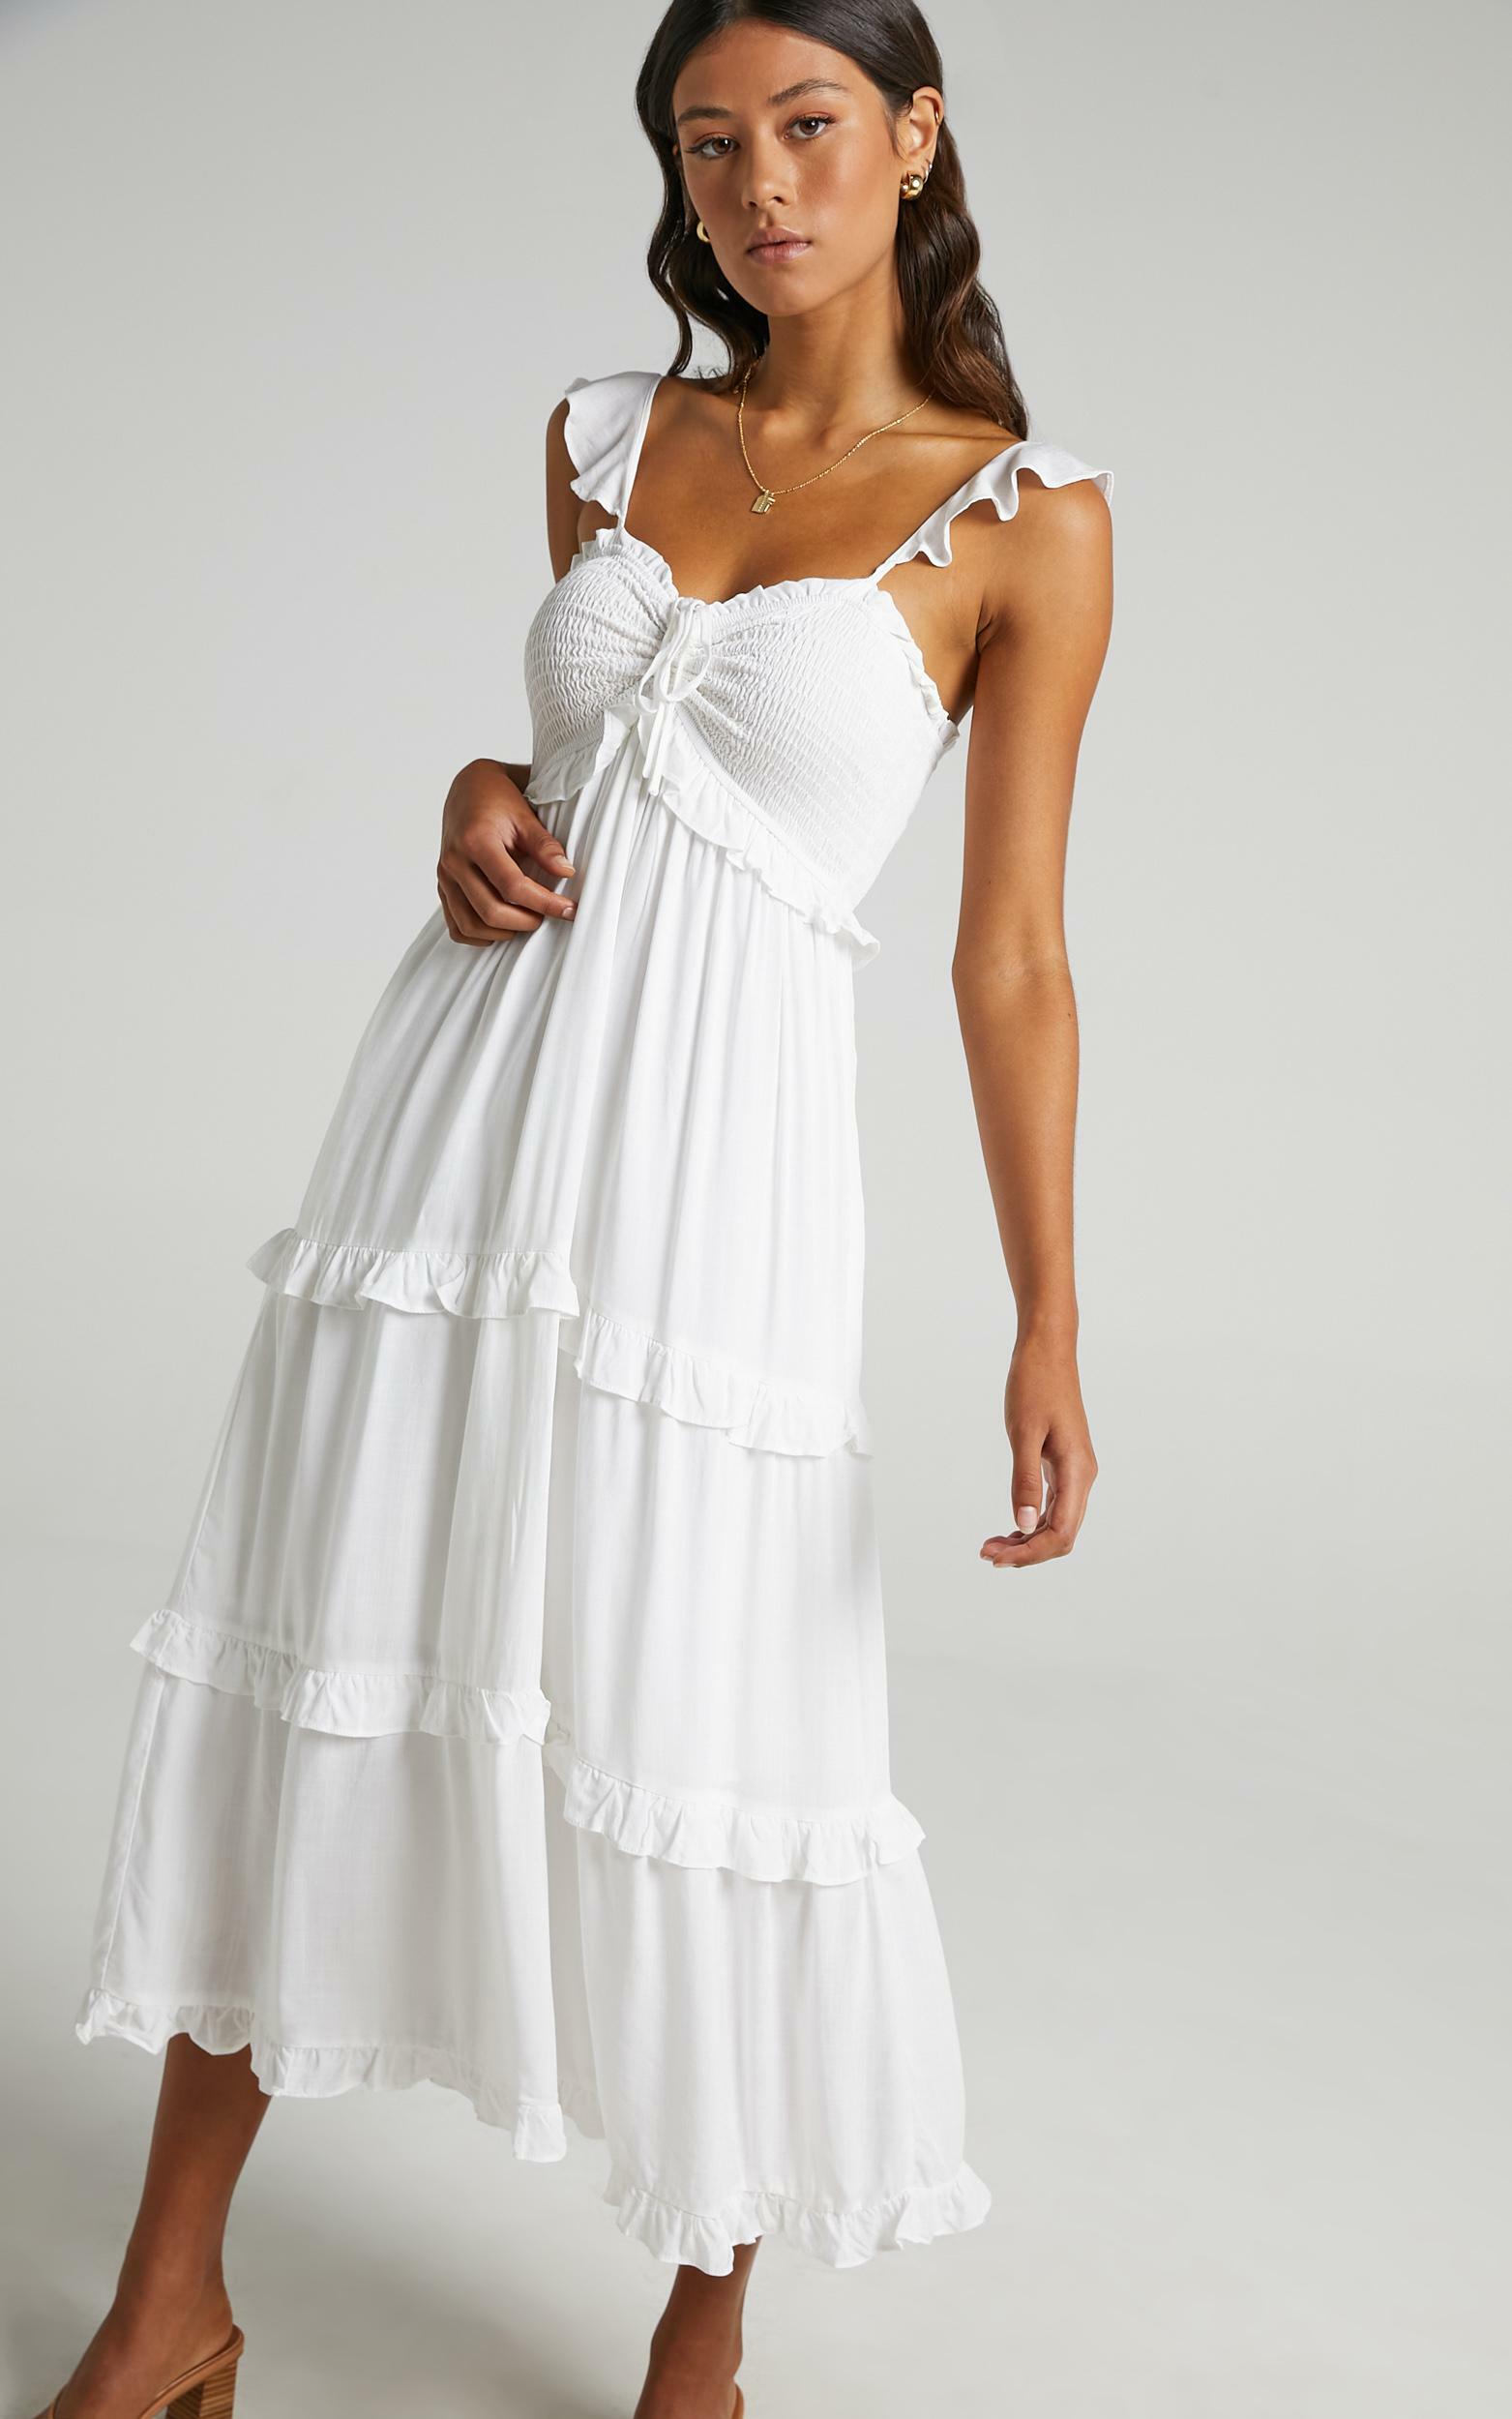 Good For The Soul Dress in White - 16, WHT5, hi-res image number null